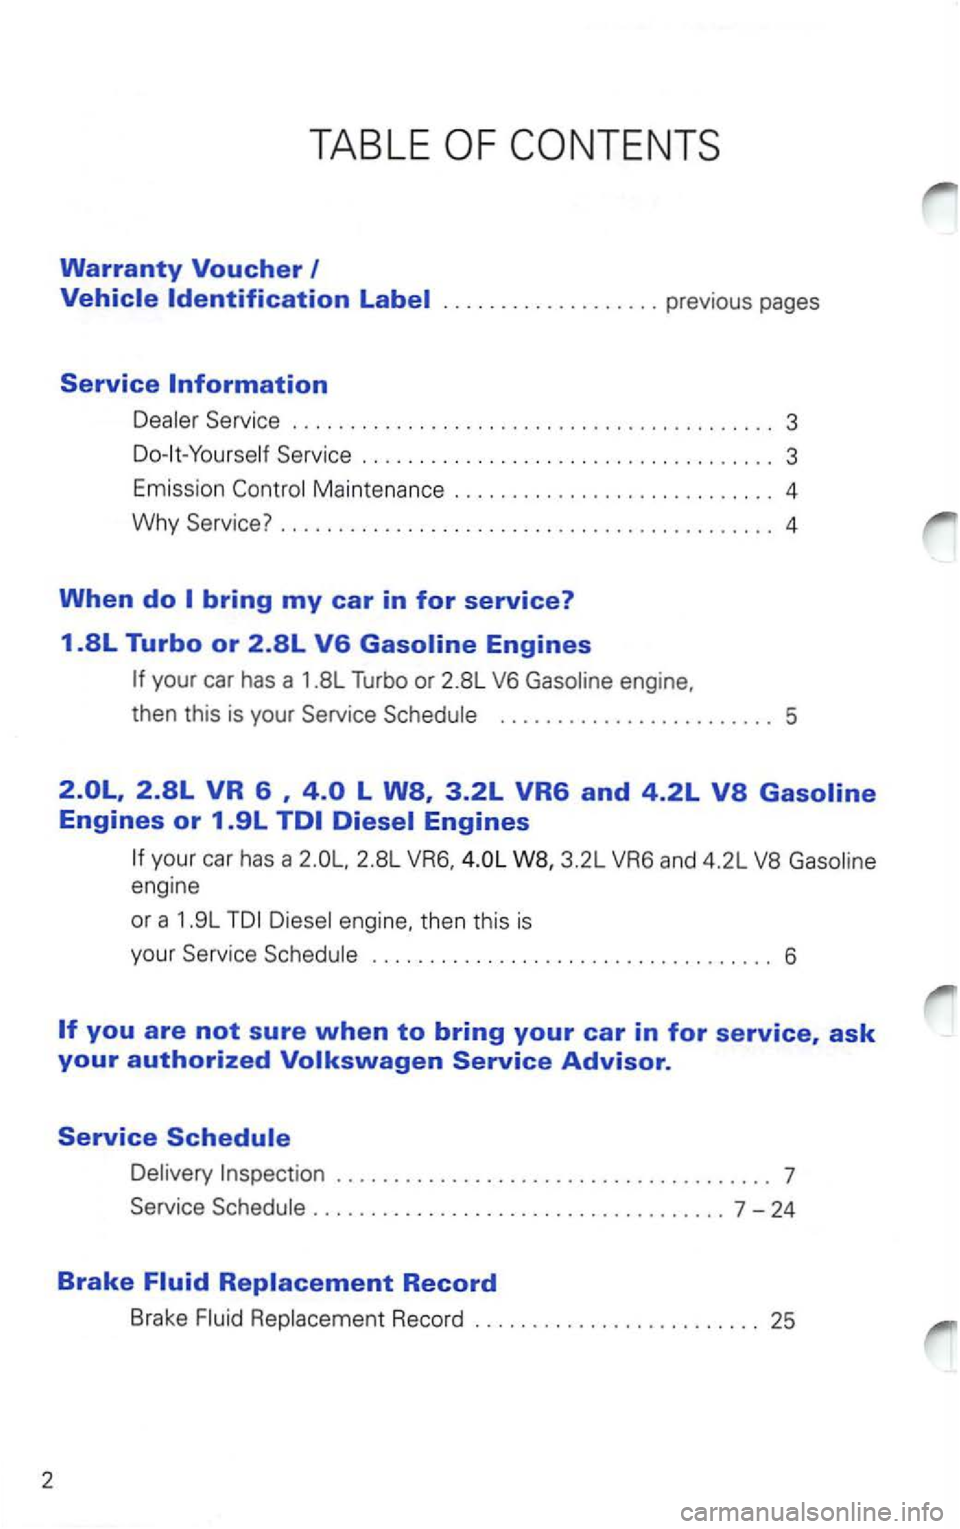 VOLKSWAGEN PASSAT 1998 Owners Guide 2 
TABLE 
Warranty Voucher 
Maintenance ............................ 4 
Why Service?  . . . . . .  . . . .  . . .  . . . . . . .  . . . .  . . . .  . .  . . . .  . .  . . . .  . .  .  4 
When do 
your